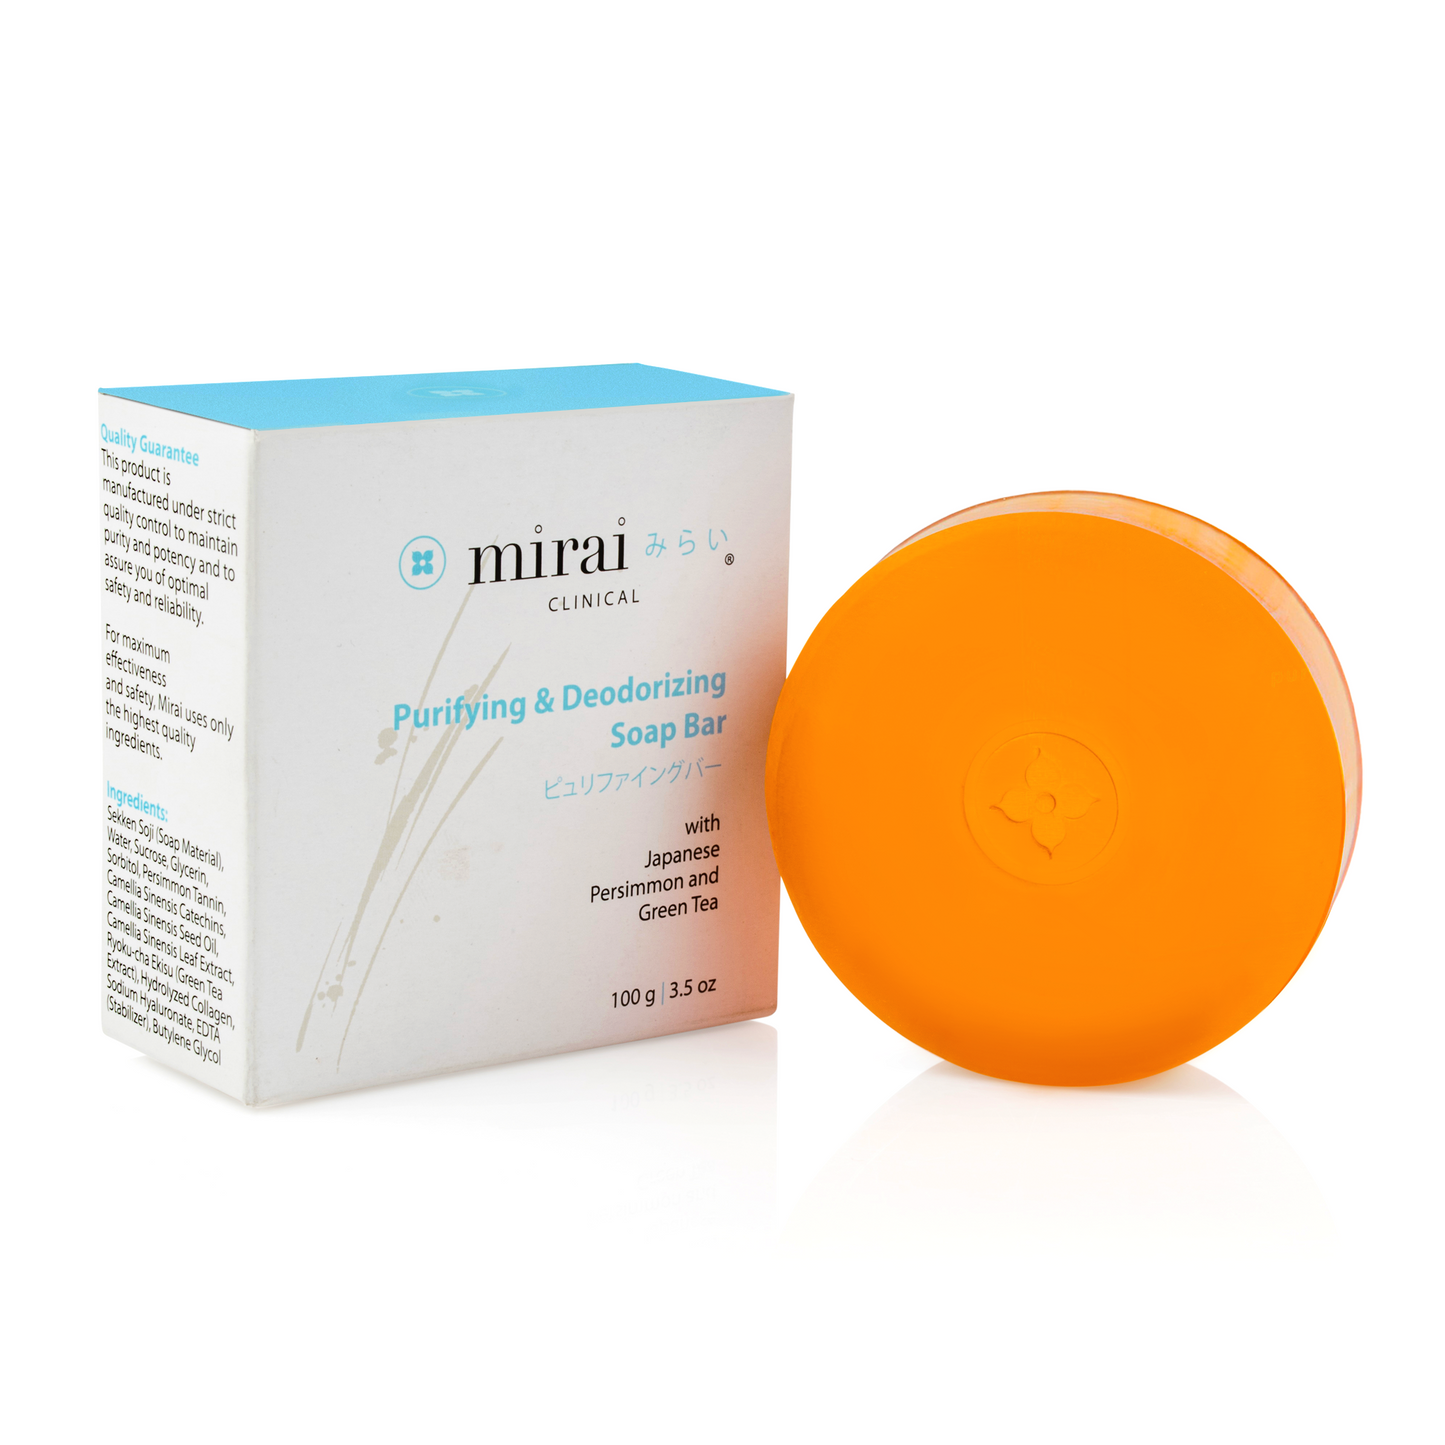 Deodorizing soap bar formulated with persimmon extract to combat nonenal body odor